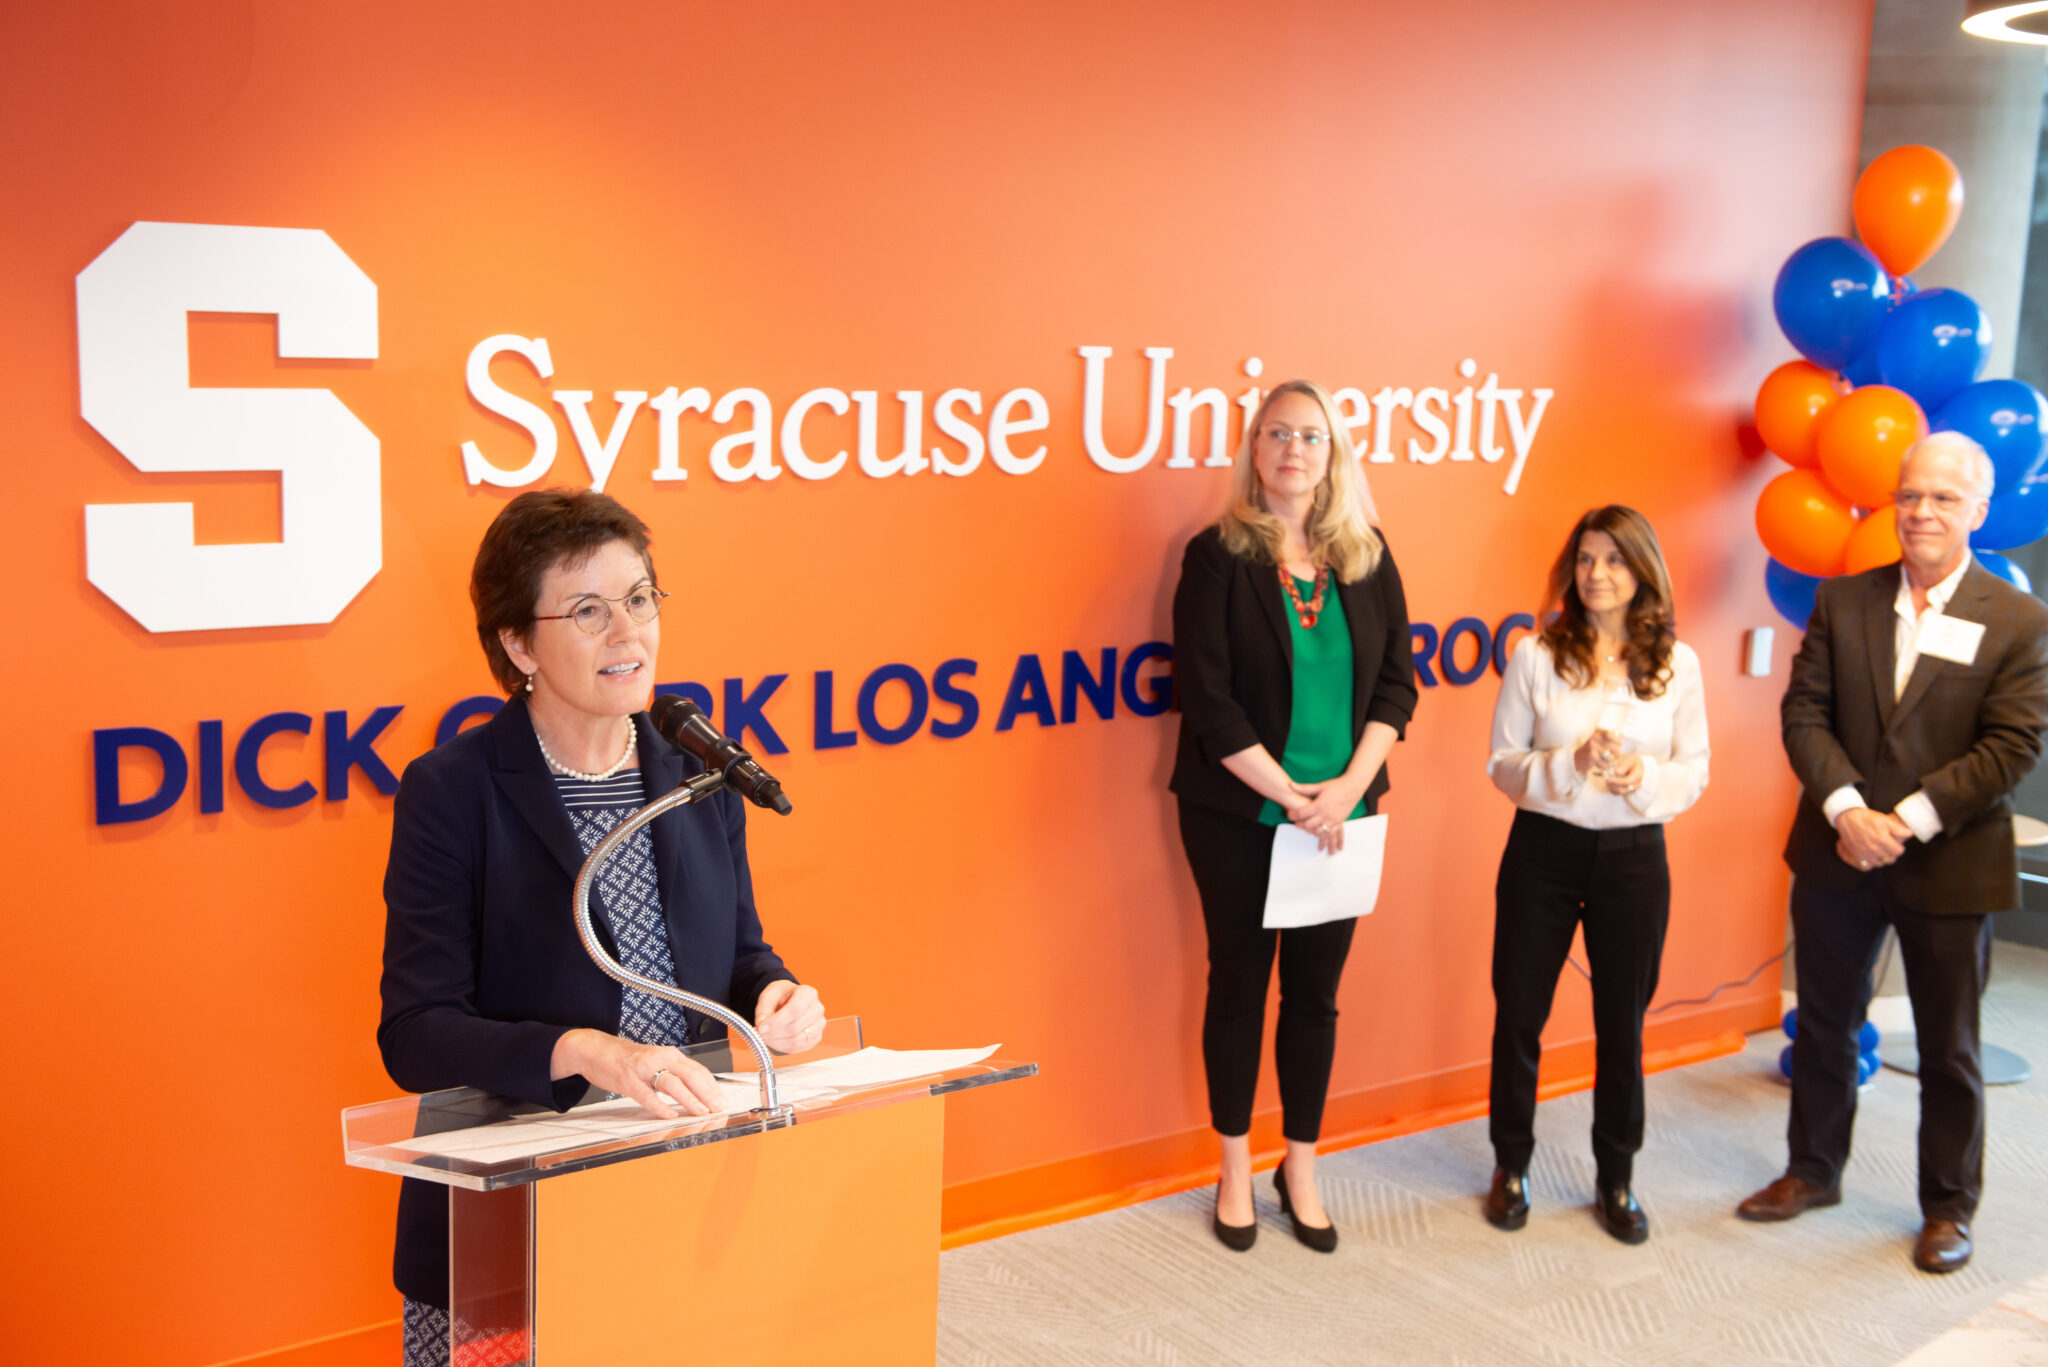 a person speaks at a podium while three other people look on